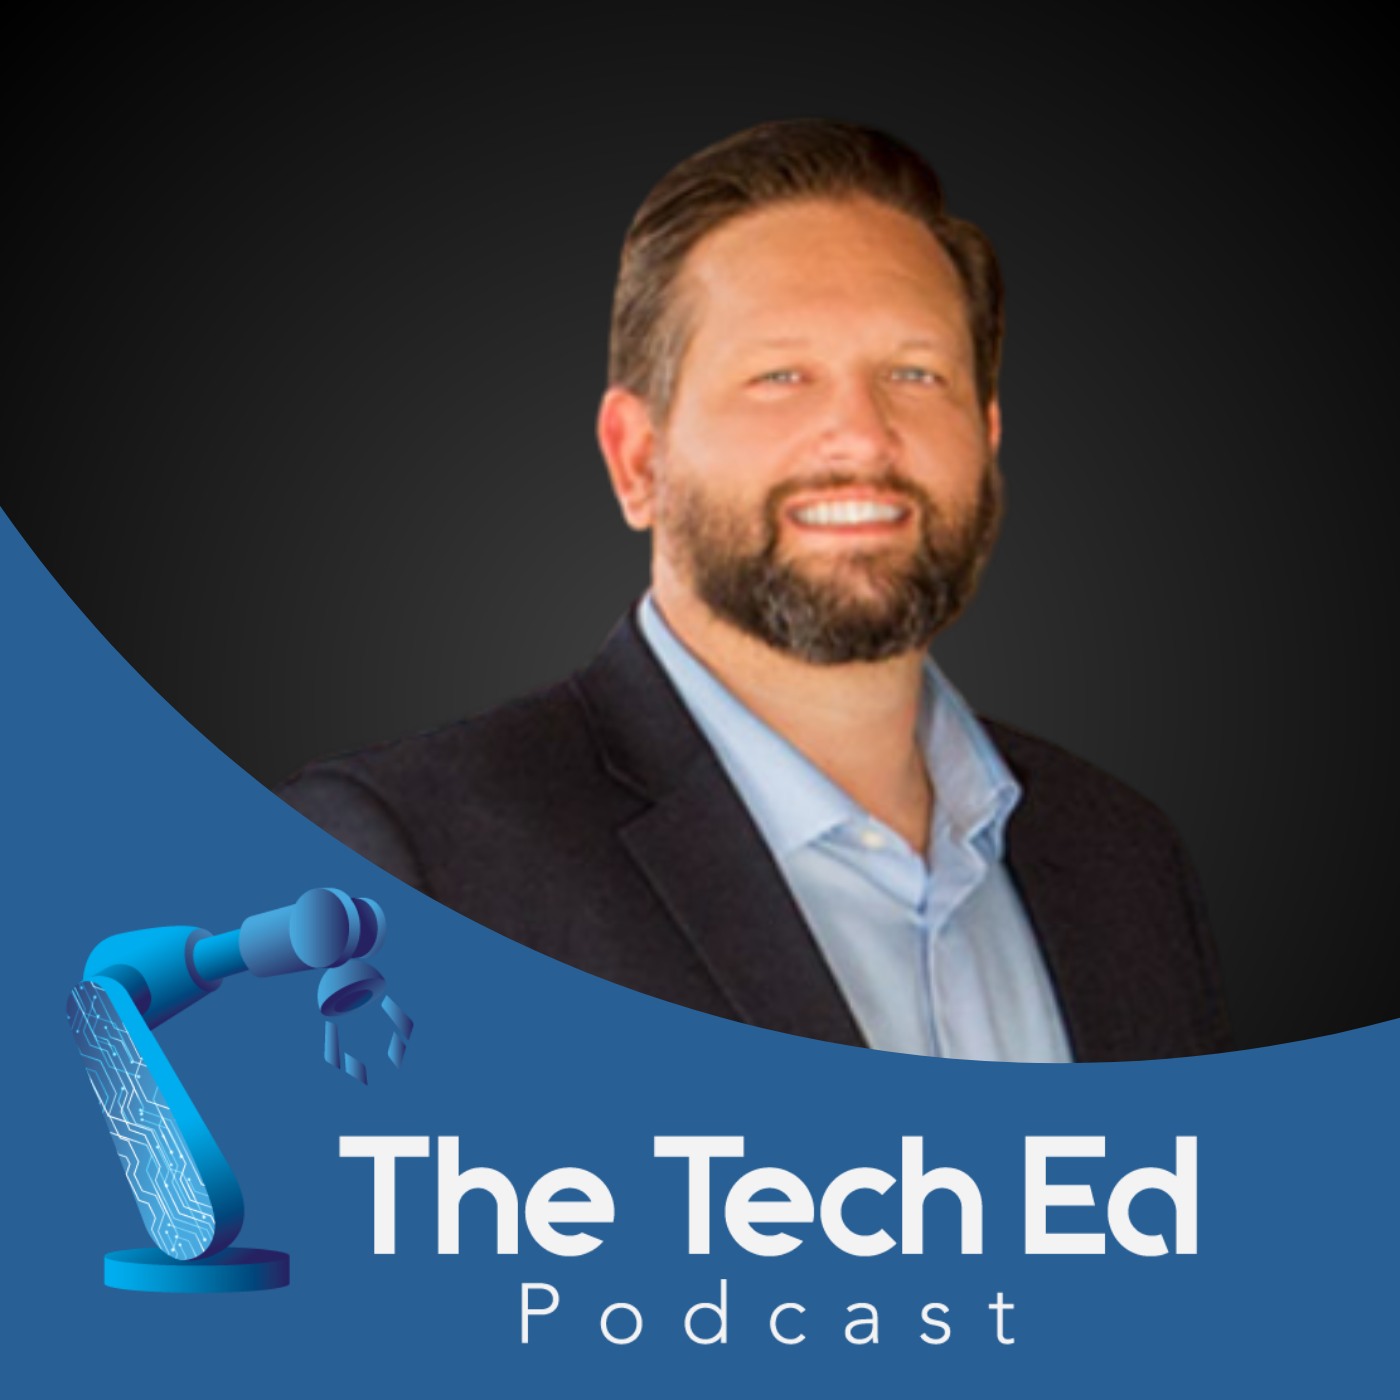 Patrick Booth on The TechEd Podcast